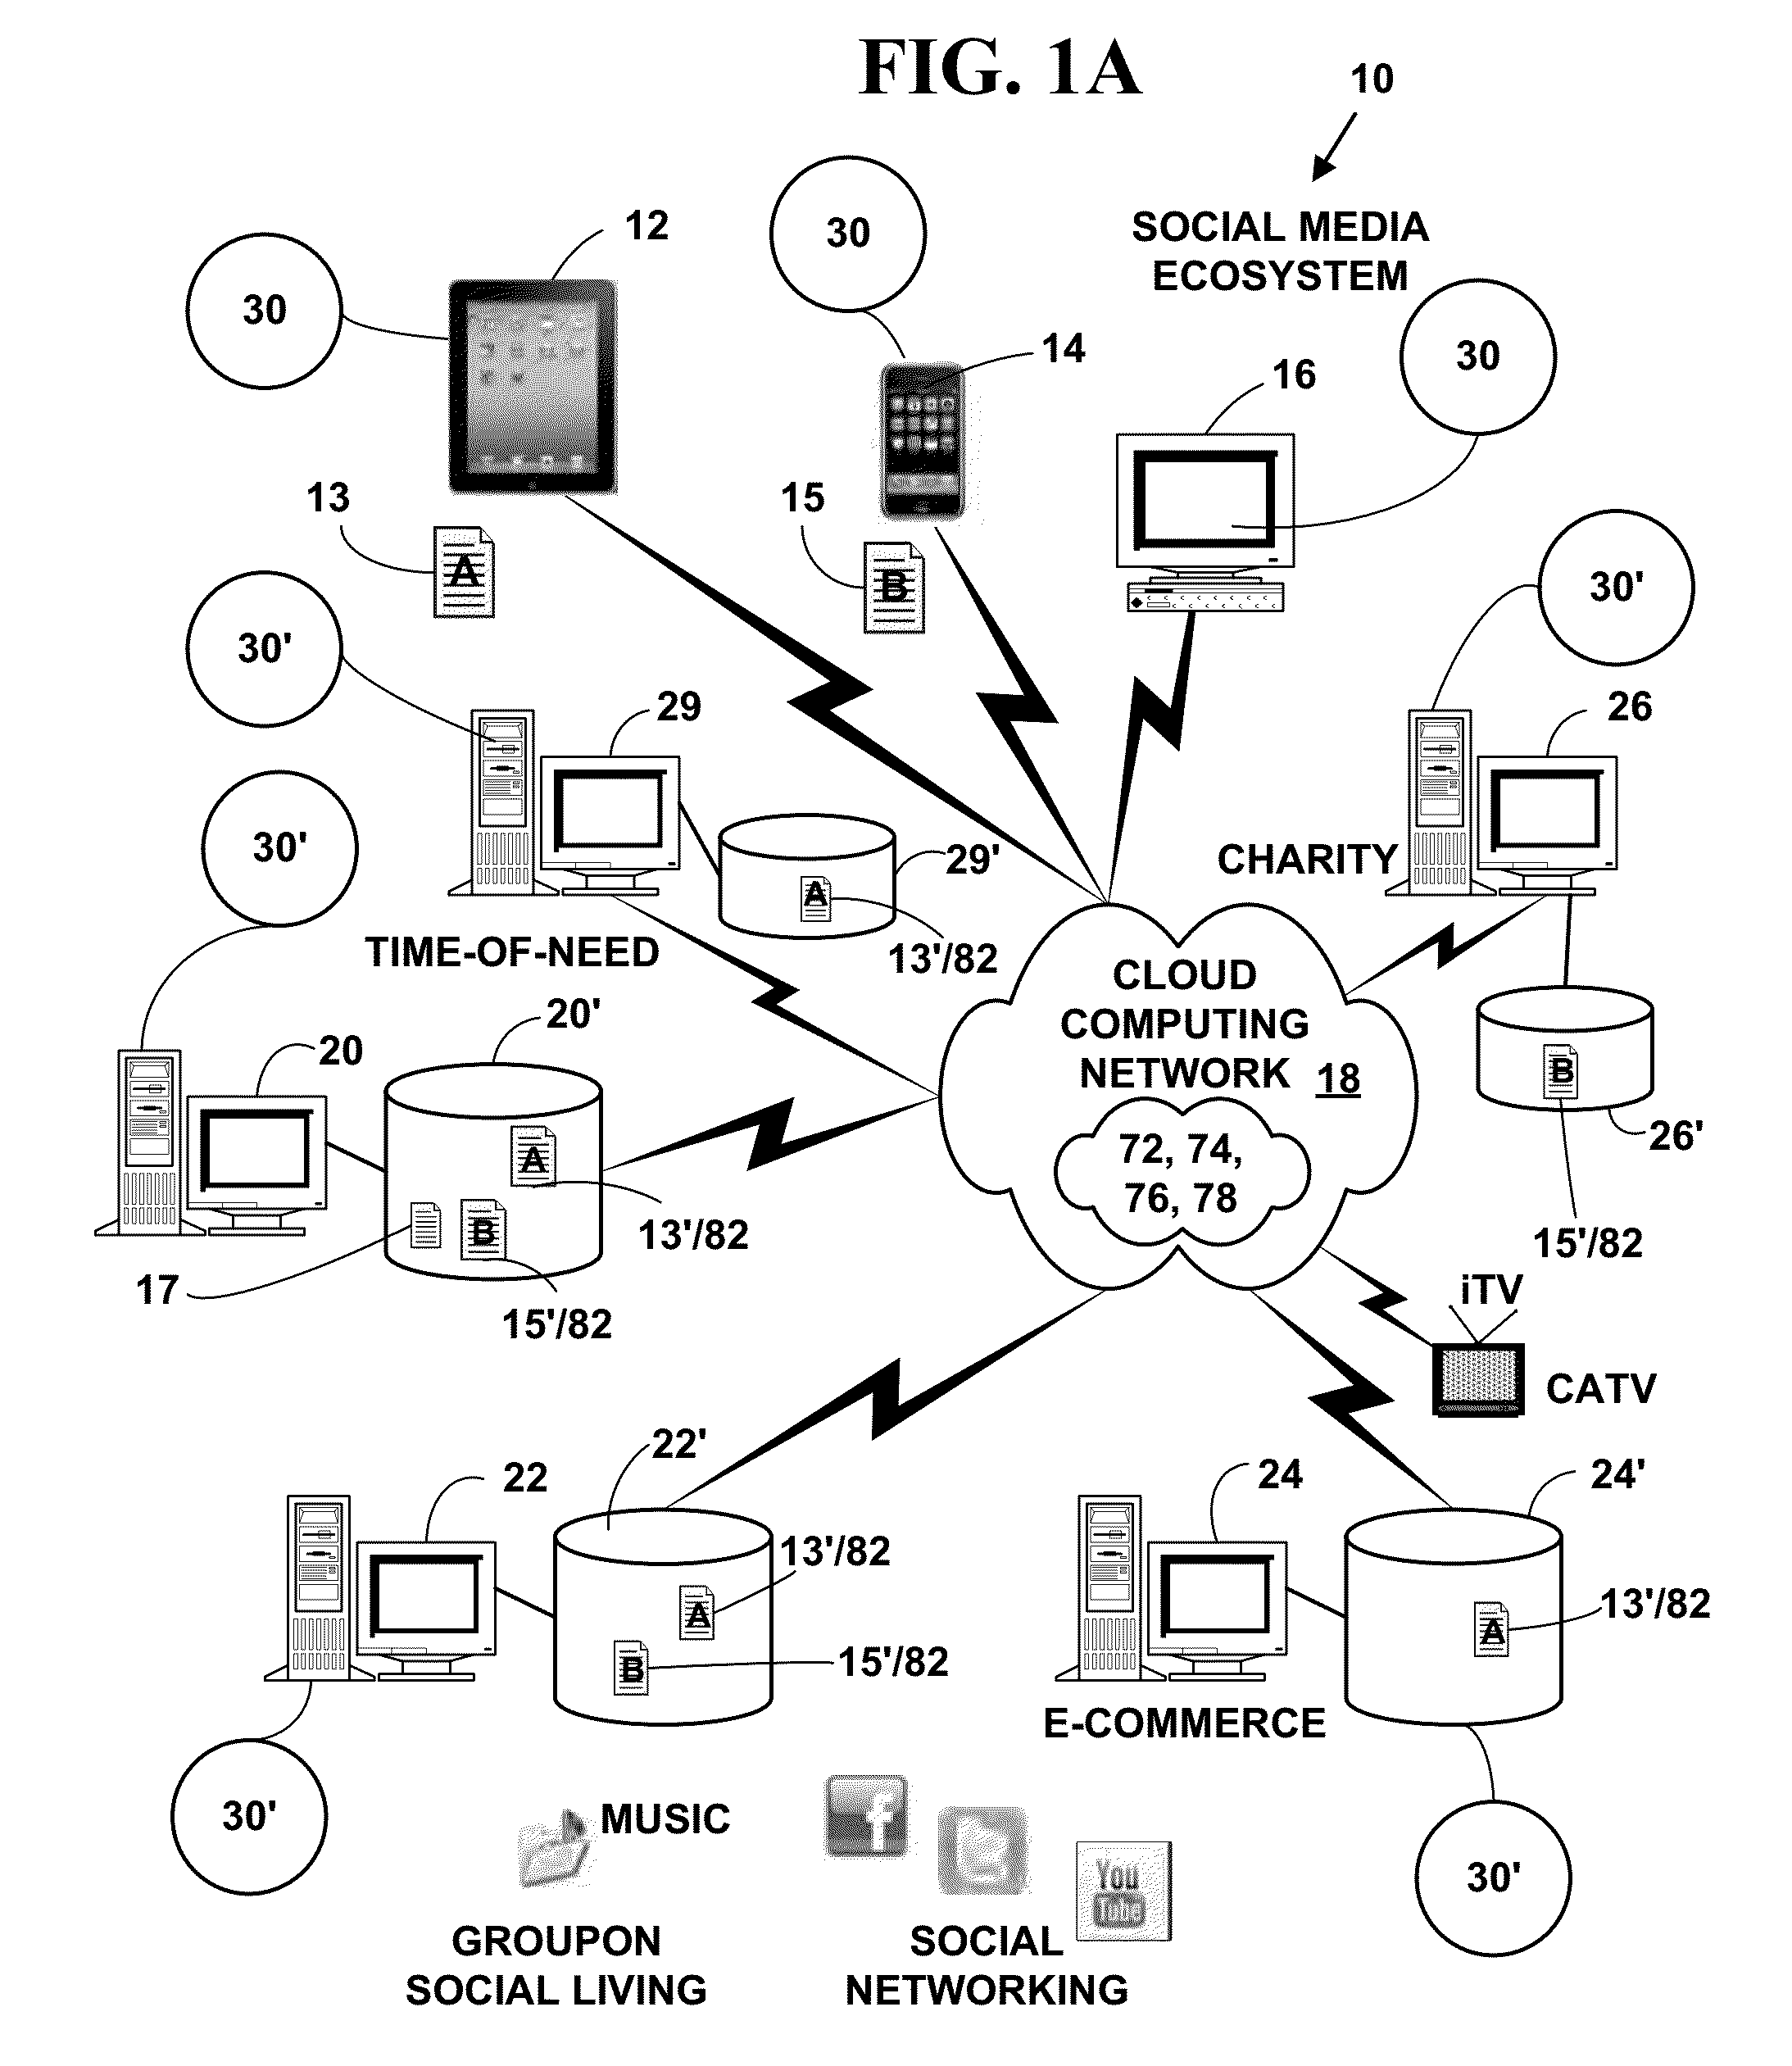 Method and system for providing searching and contributing in a social media ecosystem